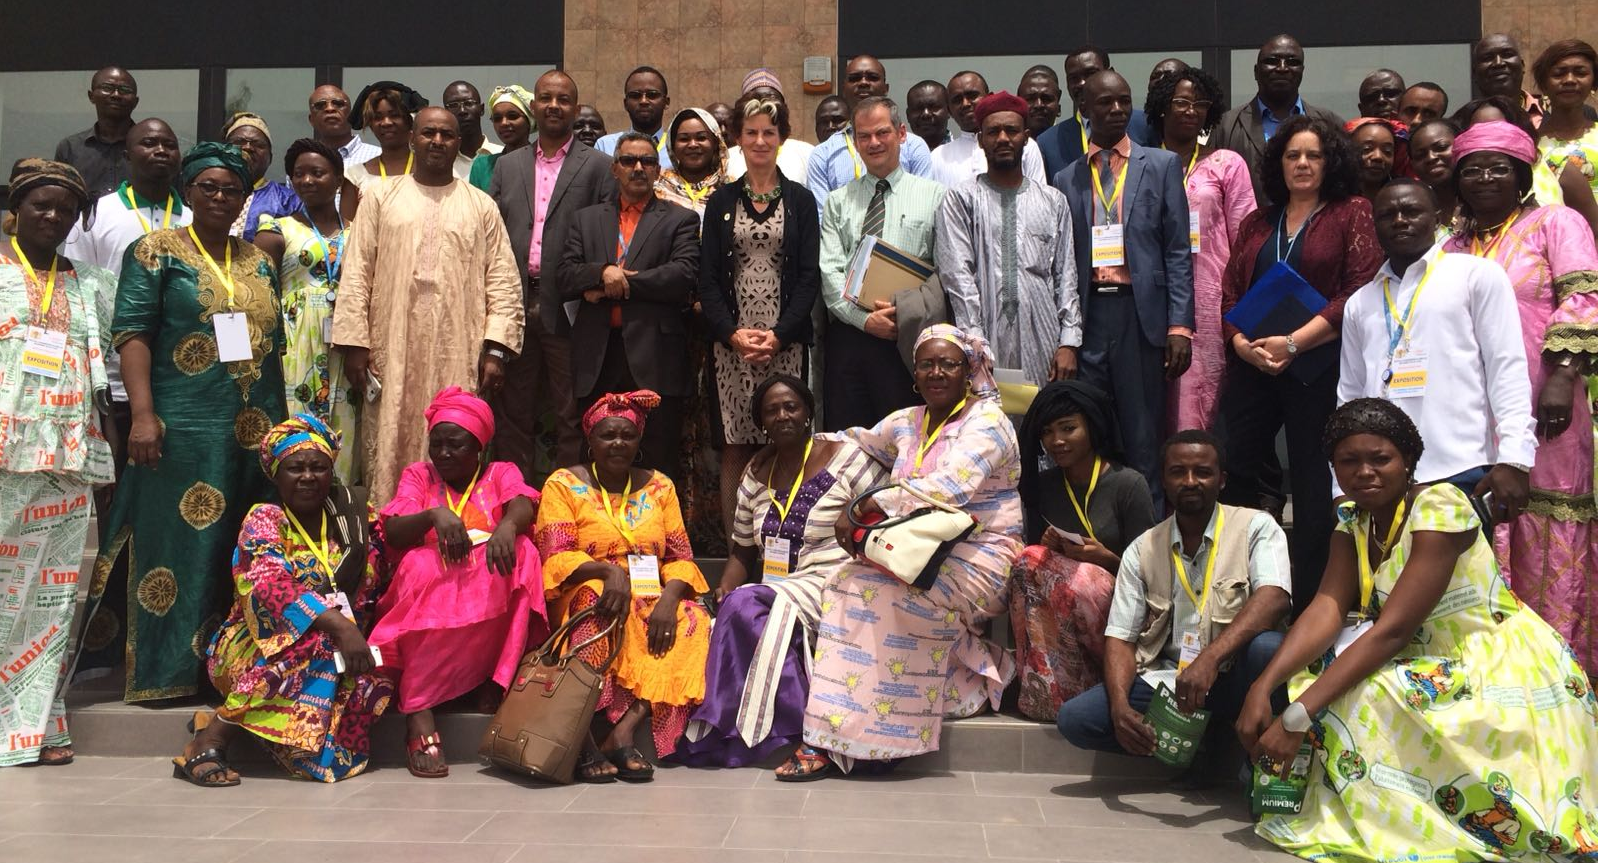 SUN Movement coordinator visits Chad: &#8220;Working together to strengthen nutrition&#8221;